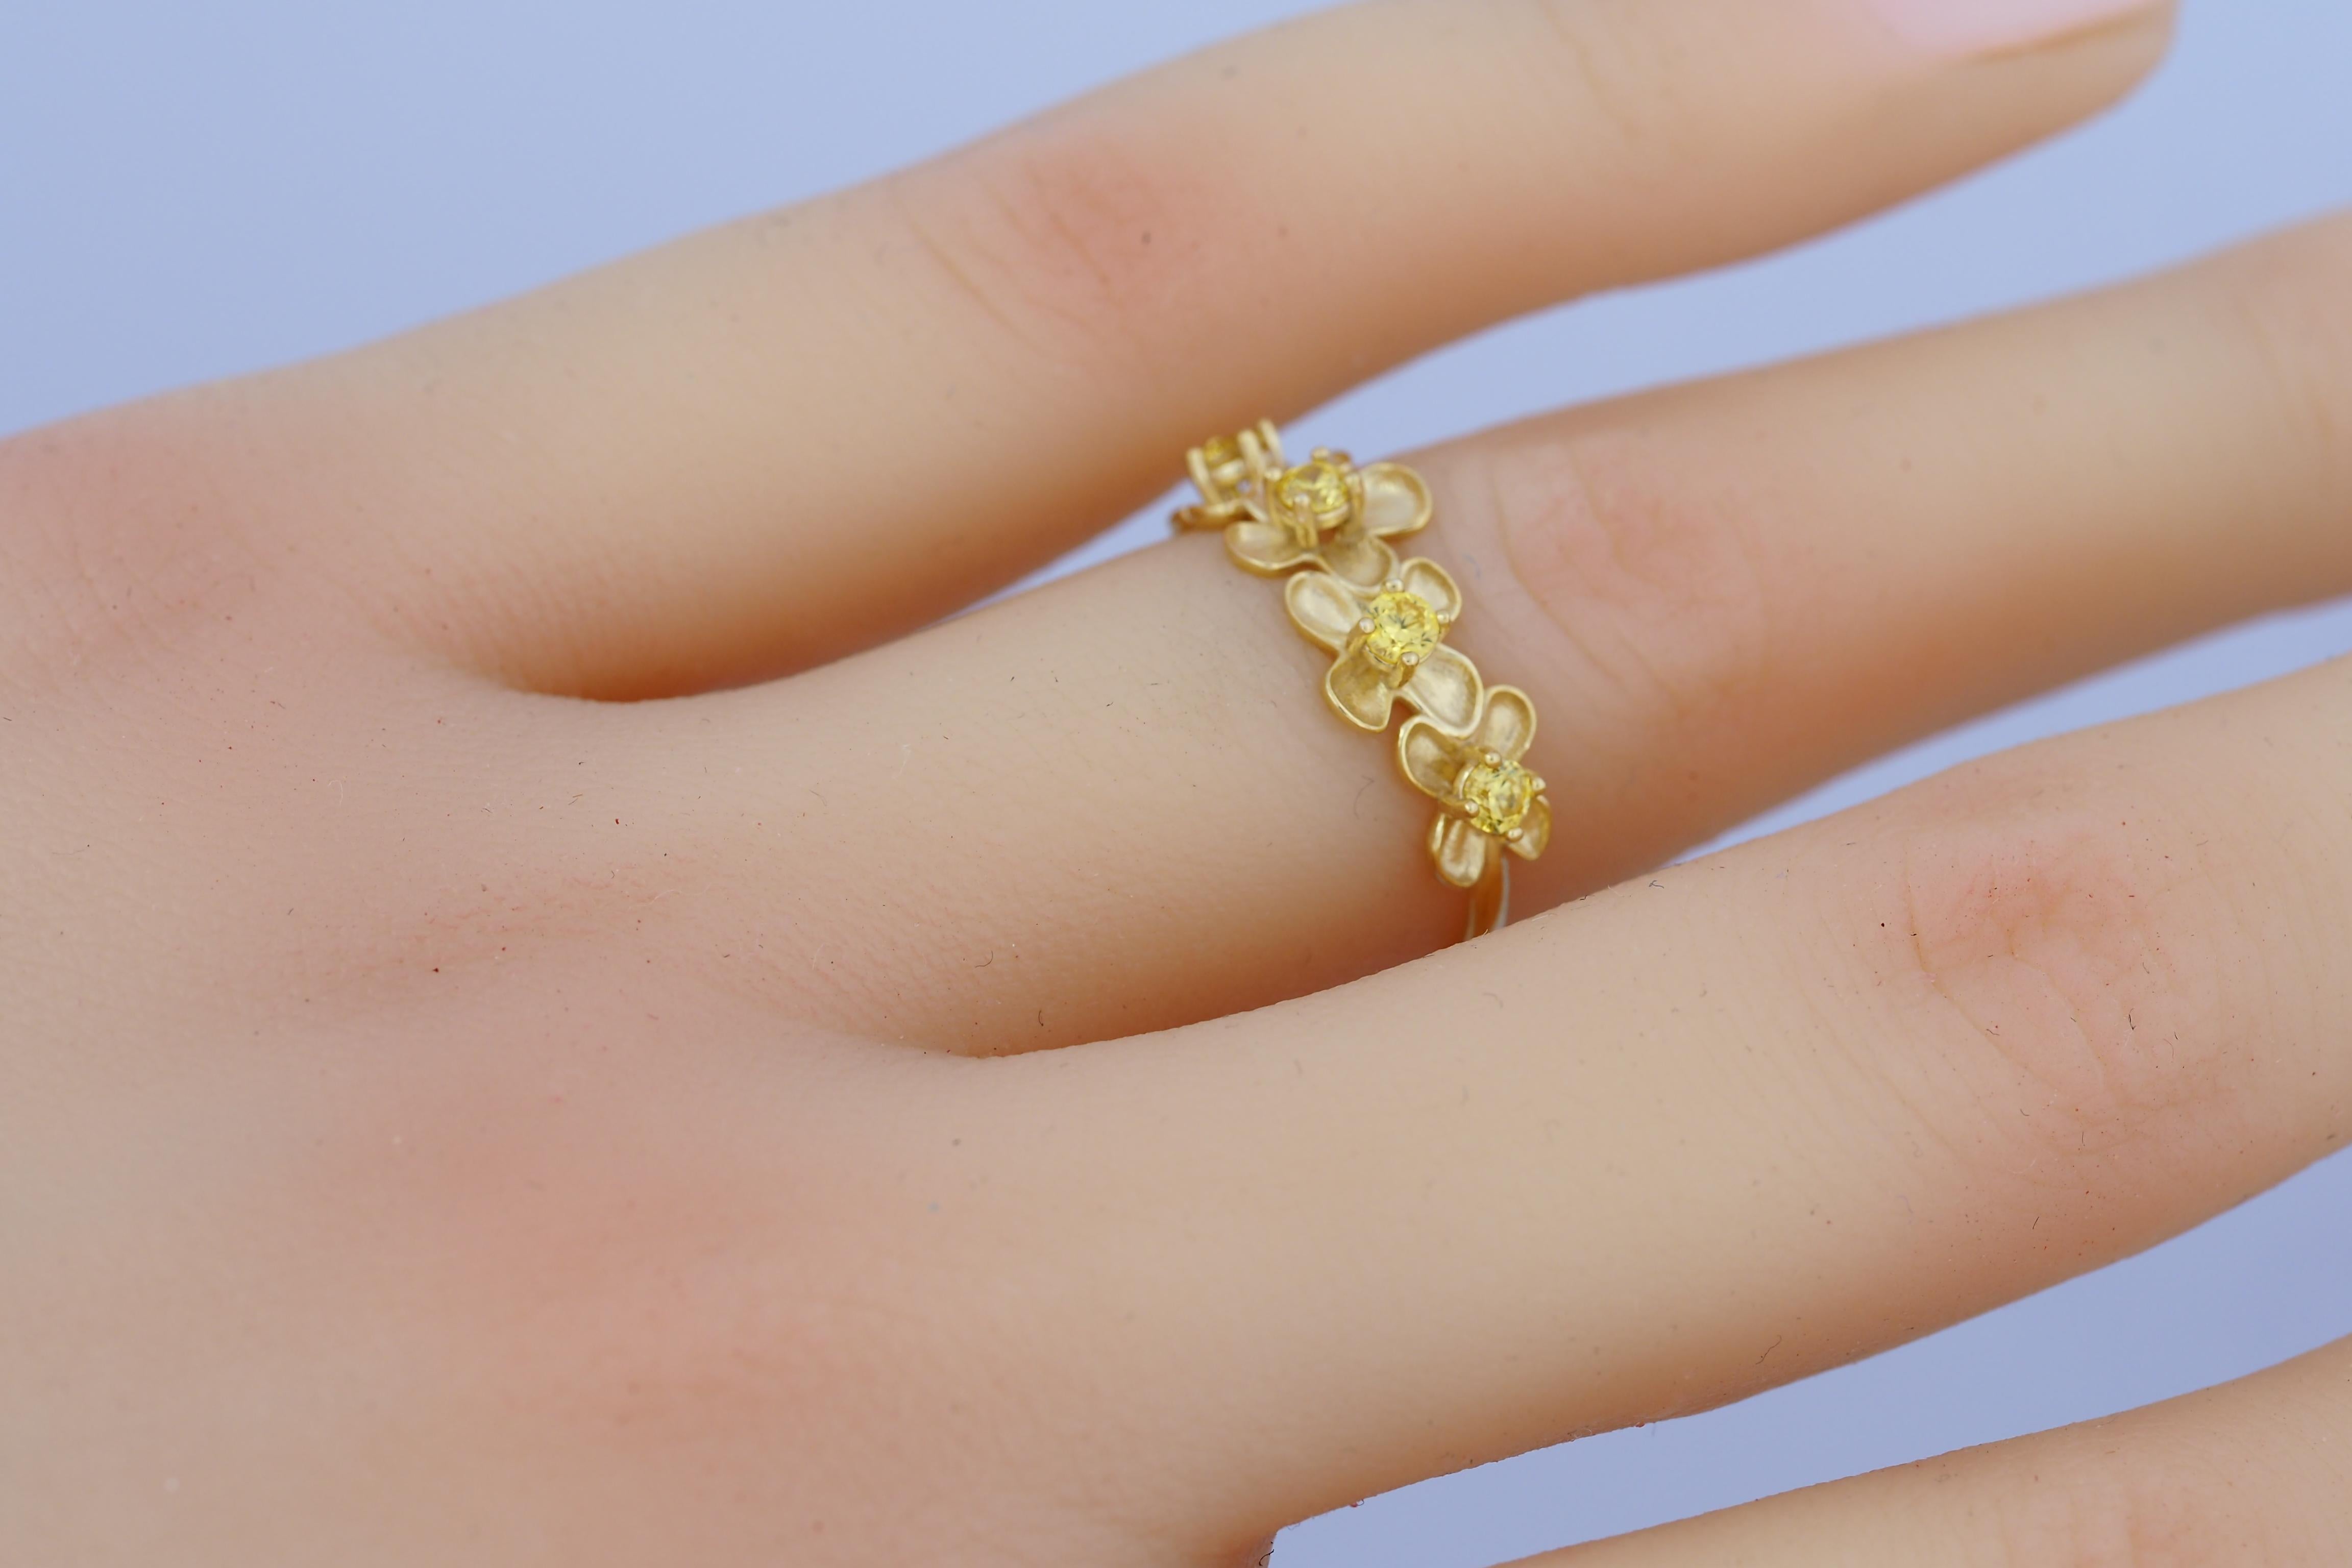 Flower 14k gold ring.
Lab yellow sapphires 14k gold ring. Daisy flower gold ring. Flower bouquet ring. Yellow gemstone ring.

Metal: 14k solid gold
Weight: 2 gr depends from size

Gemstones:
Set with lab sapphires
Color -yellow, 
Cut: round

auction